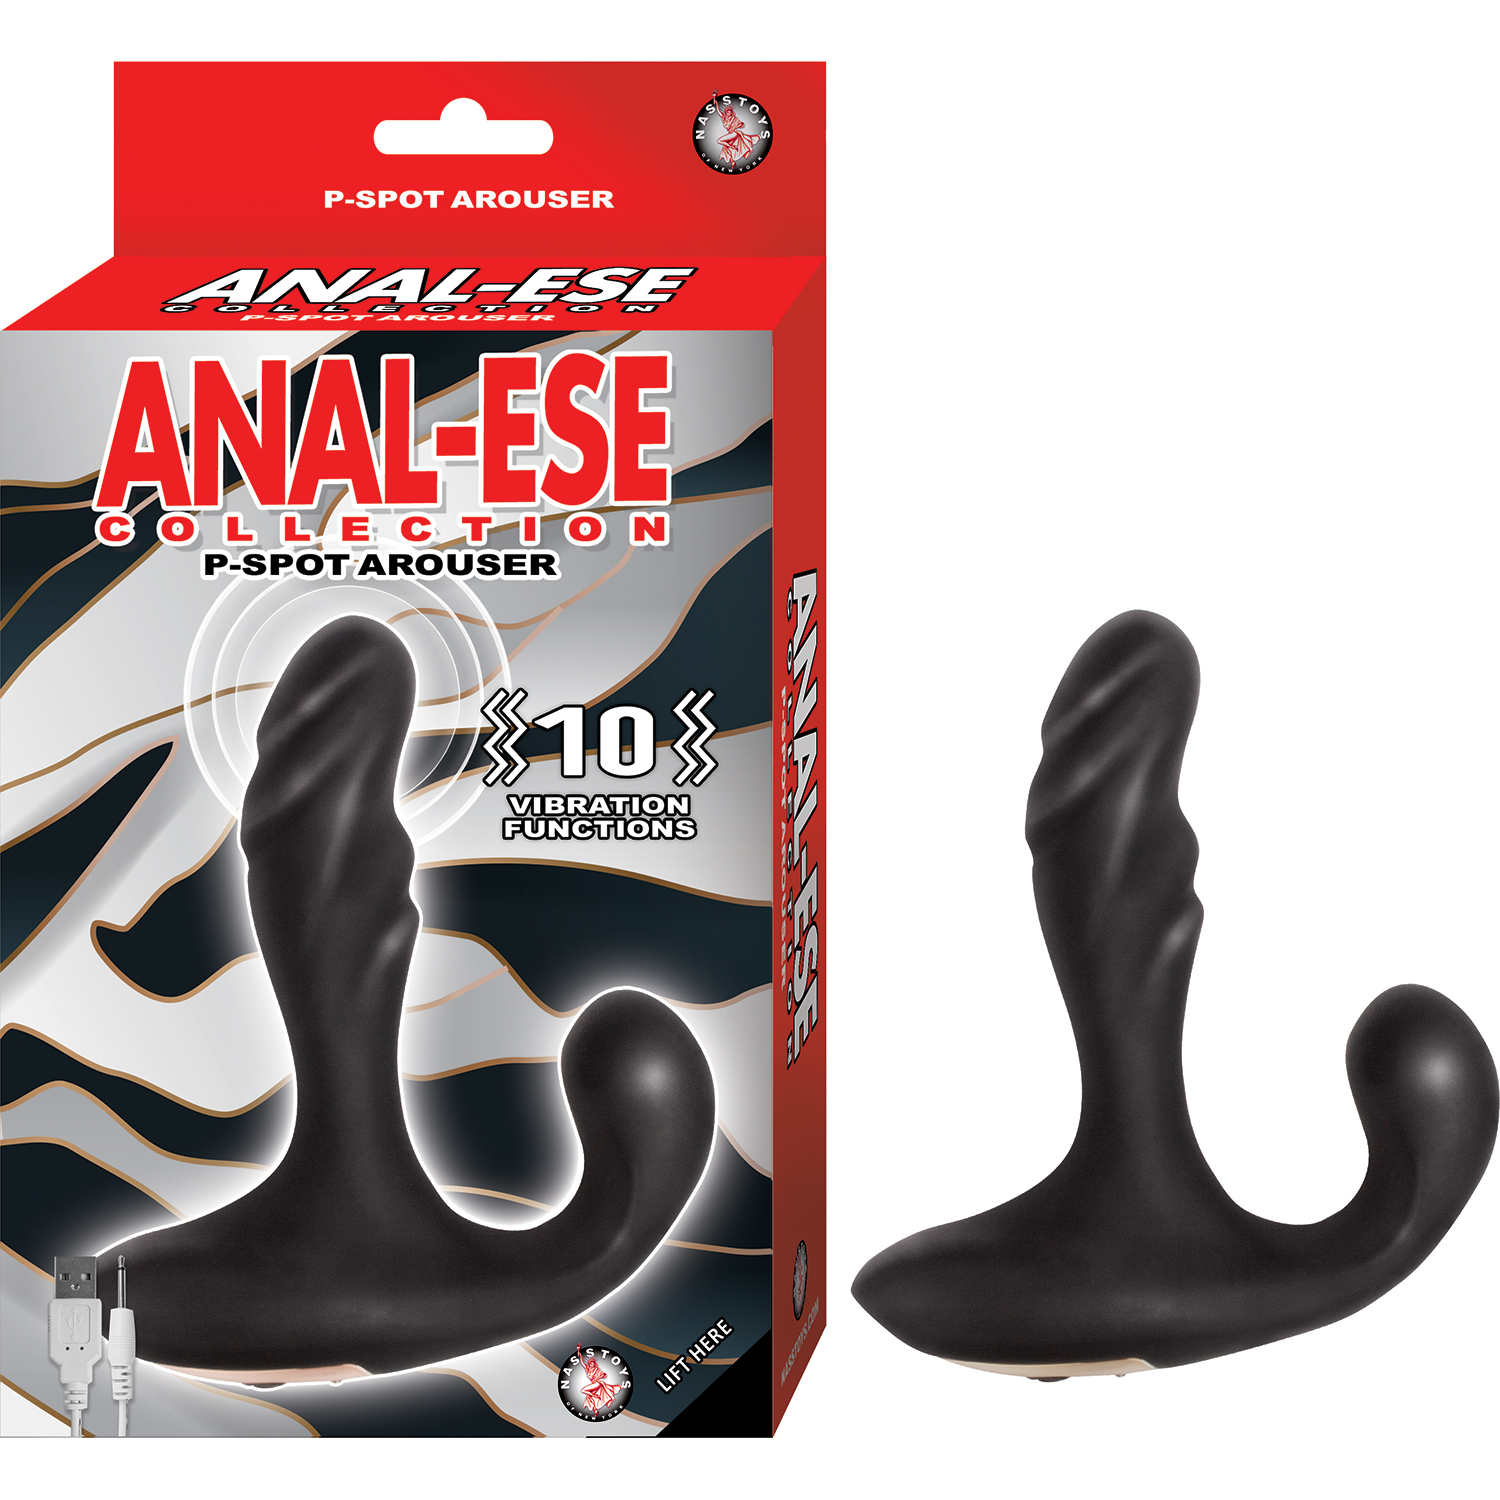 ANAL-ESE COLLECTION P-SPOT AROUSER - Click Image to Close